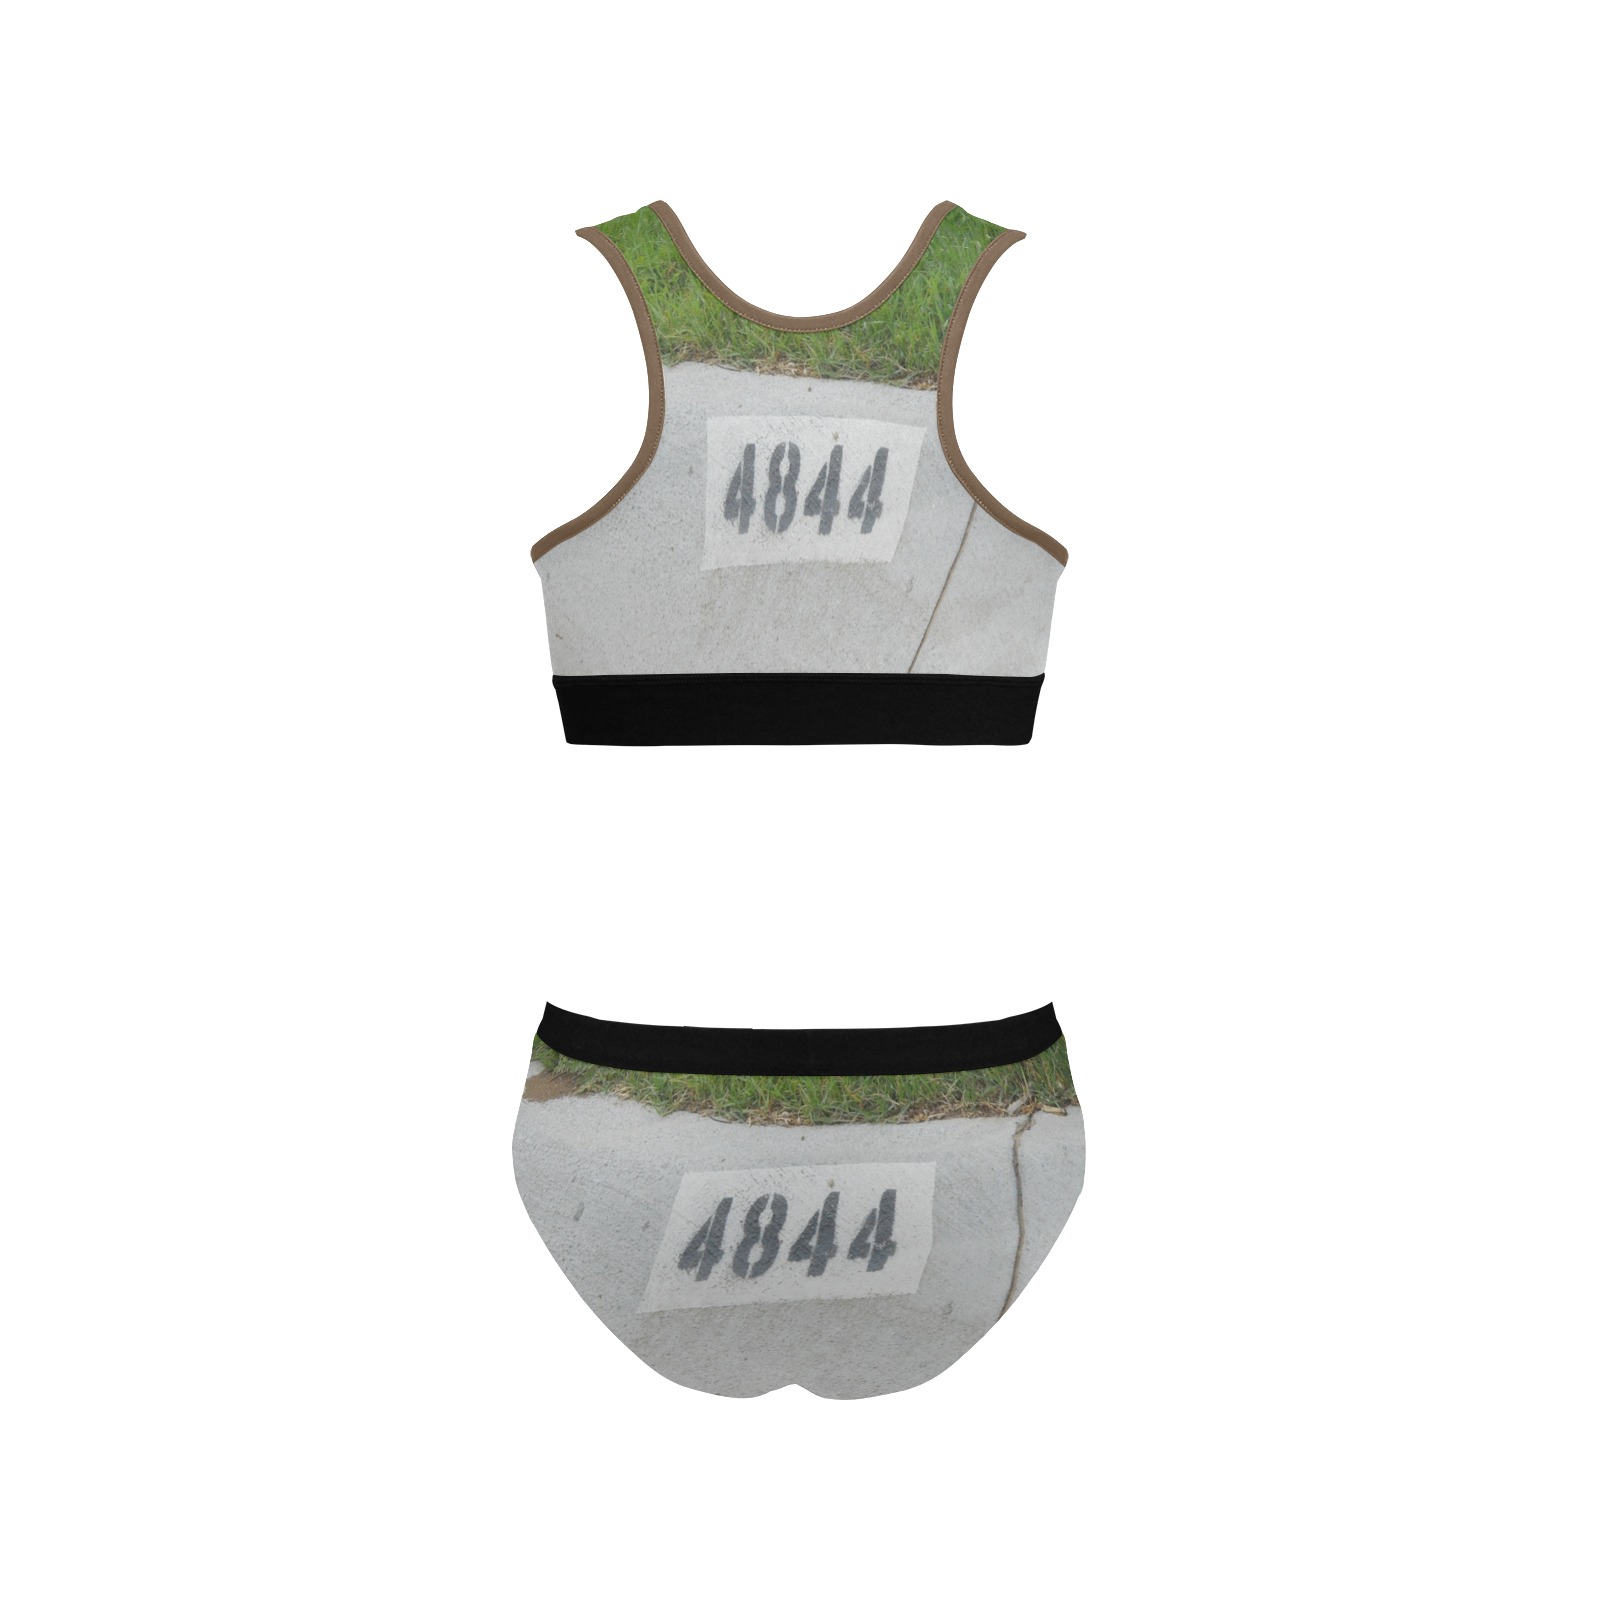 Street Number 4844 with Brown Background Women's Sports Bra Yoga Set